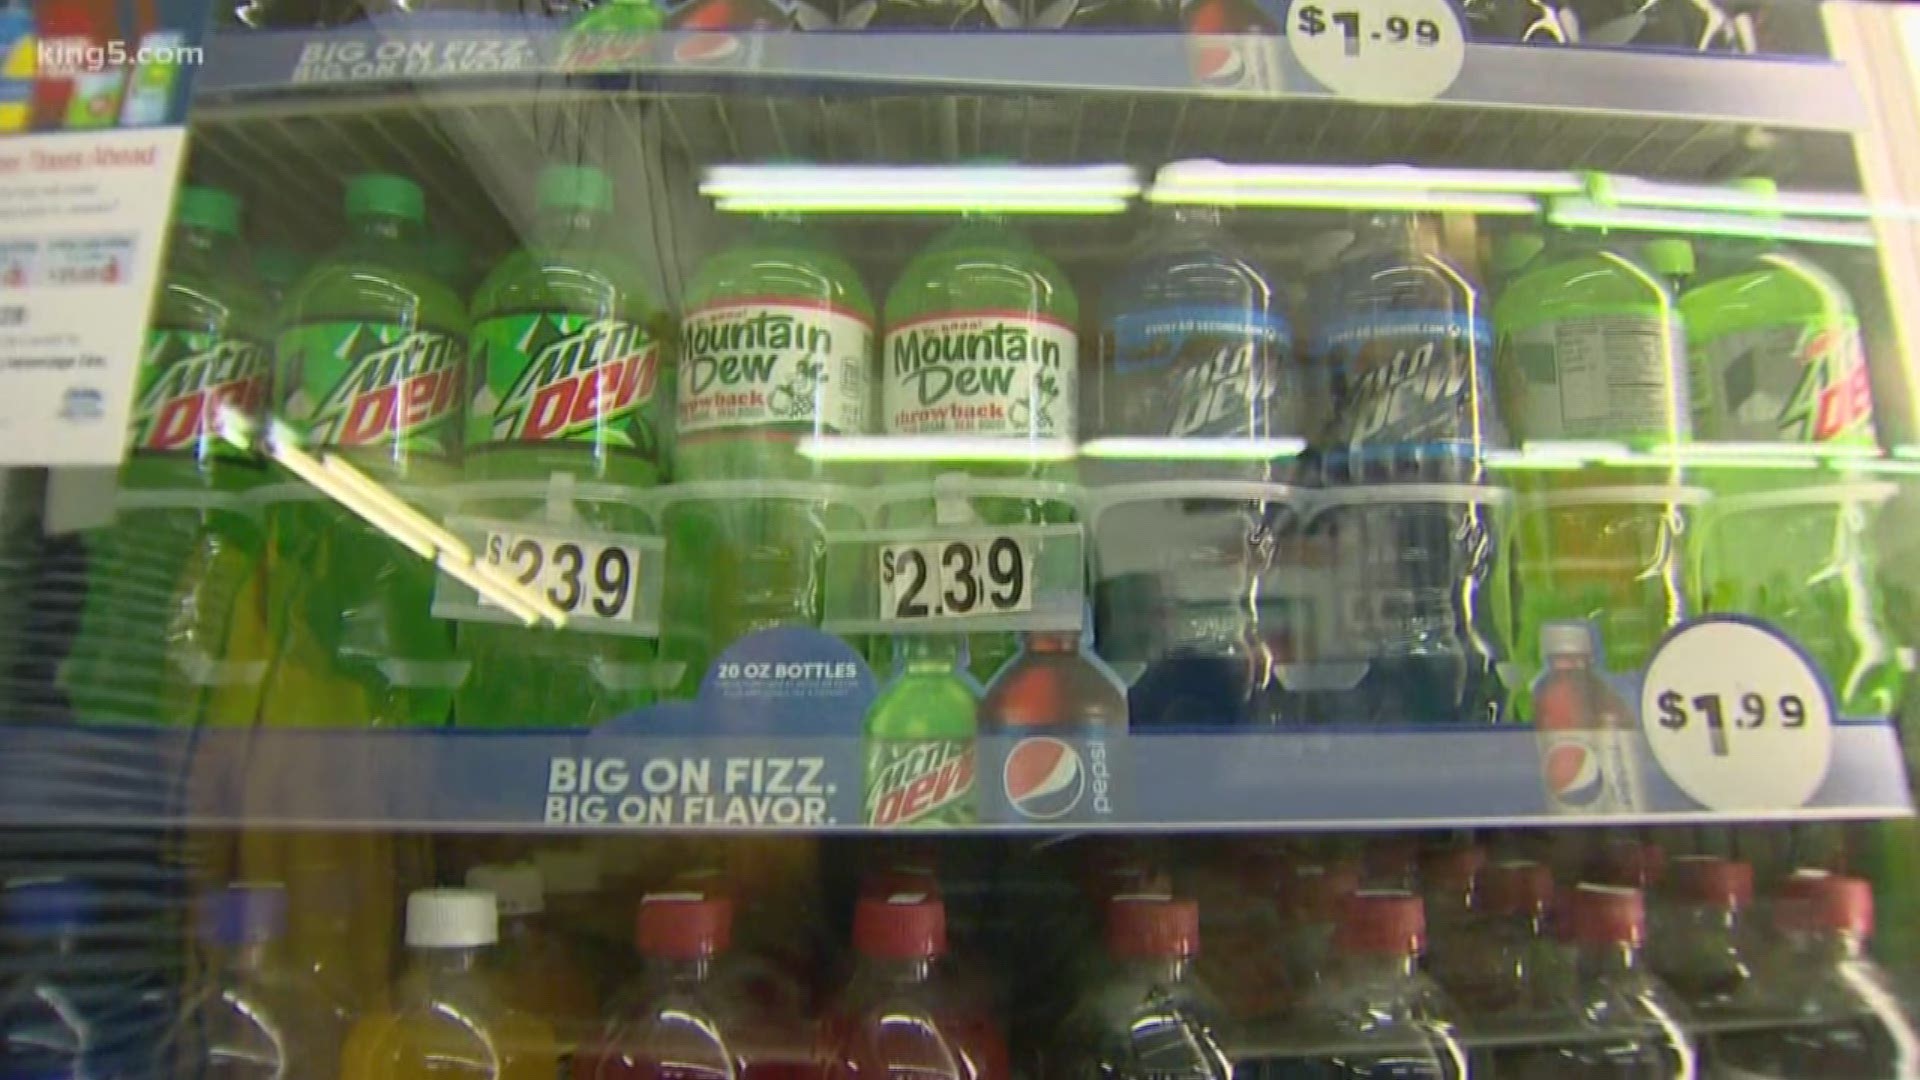 After millions in soda tax revenue ended up in a general fund, Seattle lawmakers wanted to create a special fund to keep it from happening again. Mayor Durkan plans to veto the bill, but the council has another chance to override her veto. KING 5's Kalie Greenberg reports.